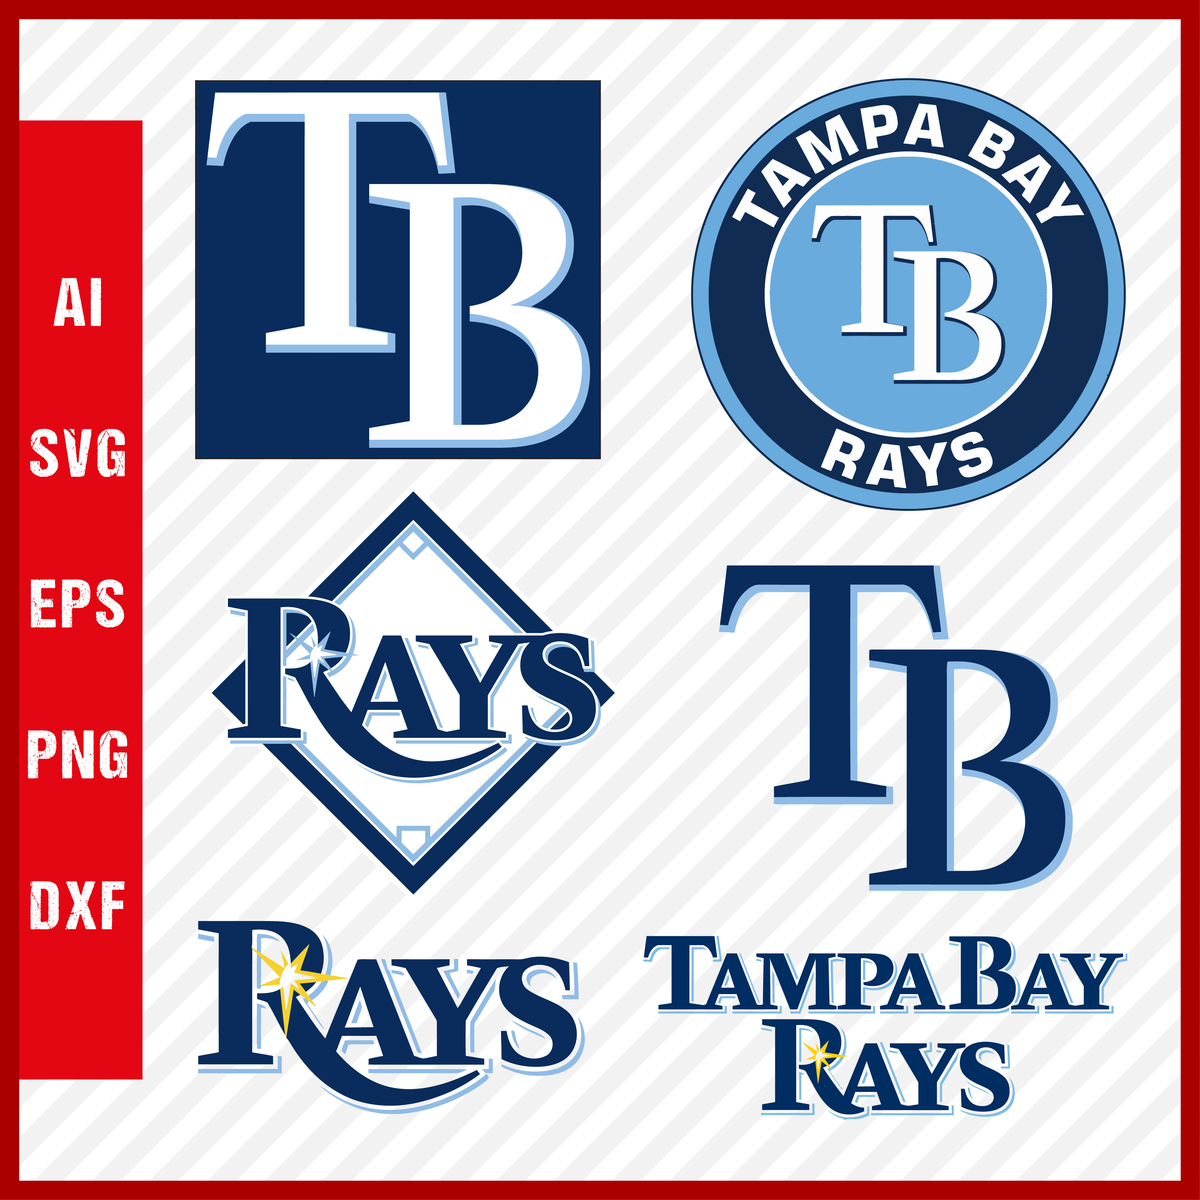 Tampa Bay Rays Team Svg, Dxf, Eps, Png, Clipart, Silhouette and Cutfil